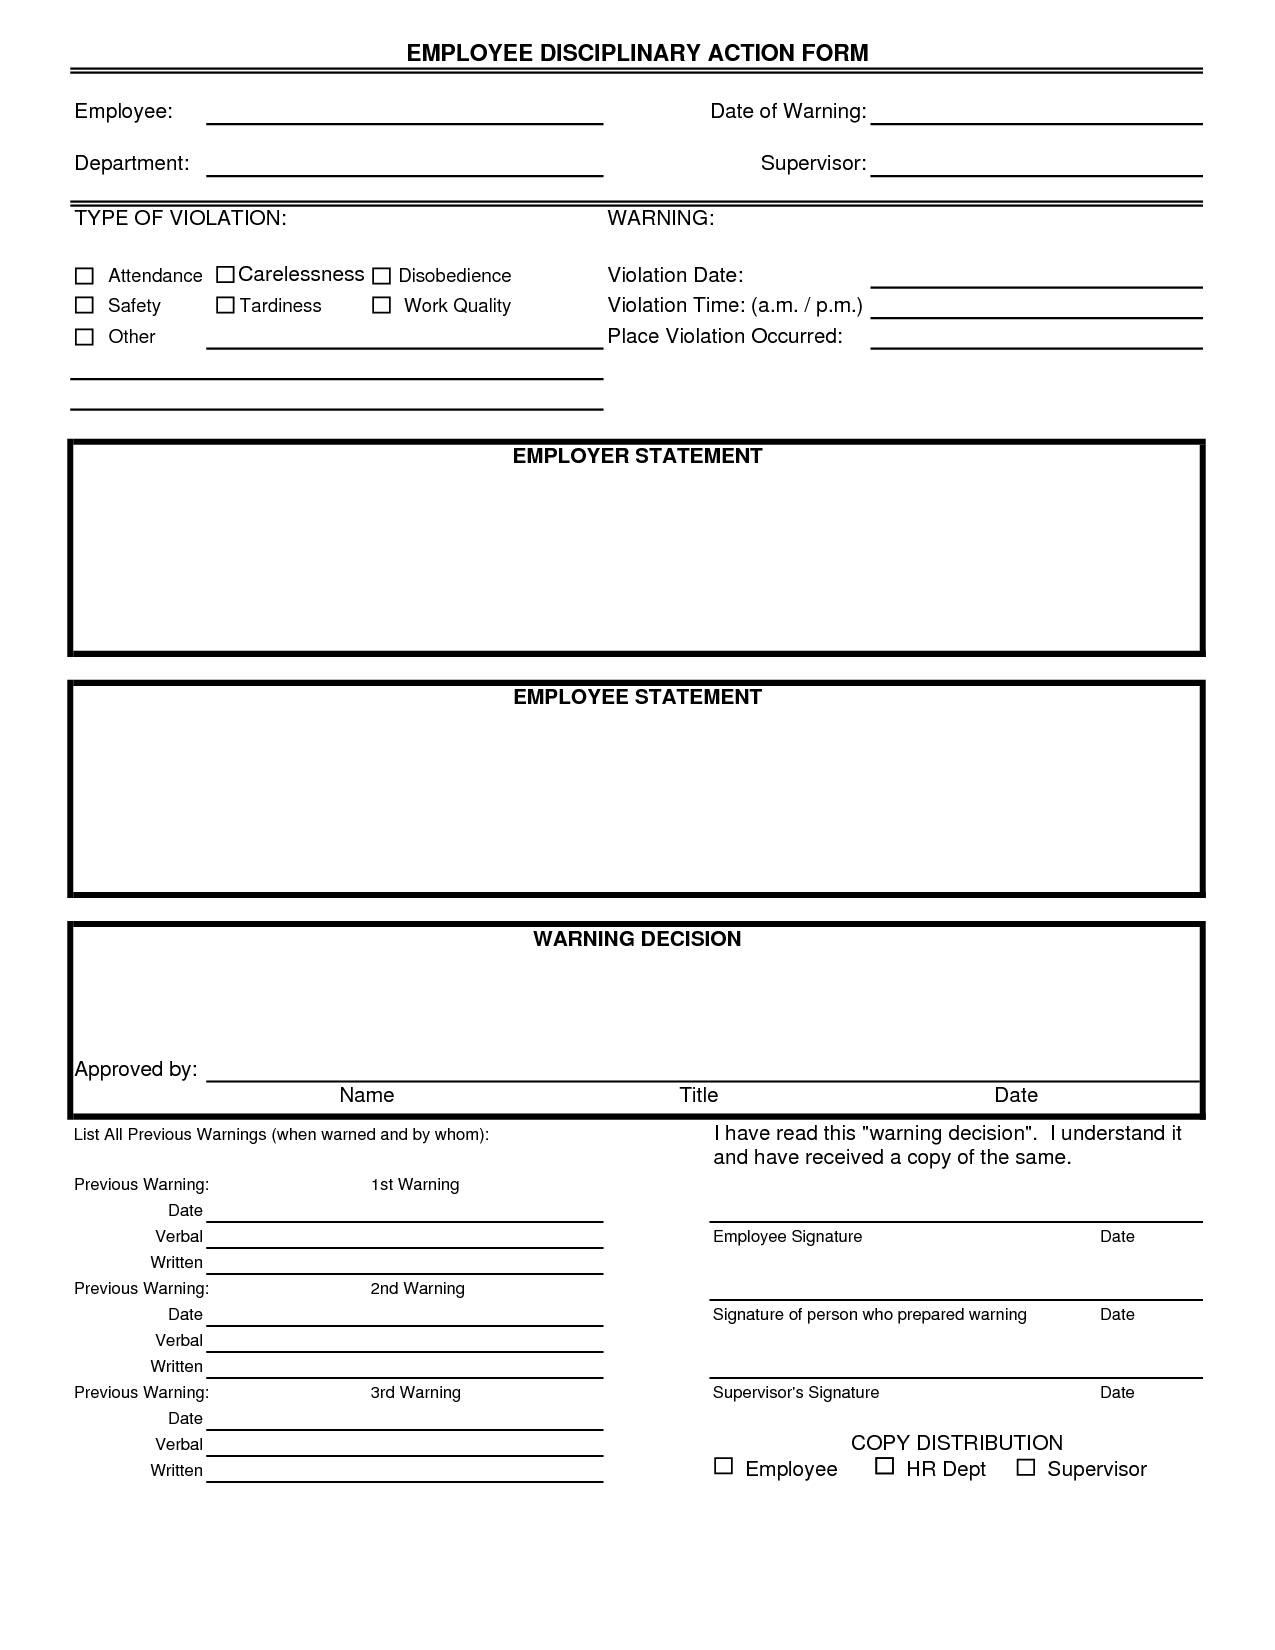 Disciplinary Form Template Free | Employee Disciplinary Action Form - Free Printable Hr Forms